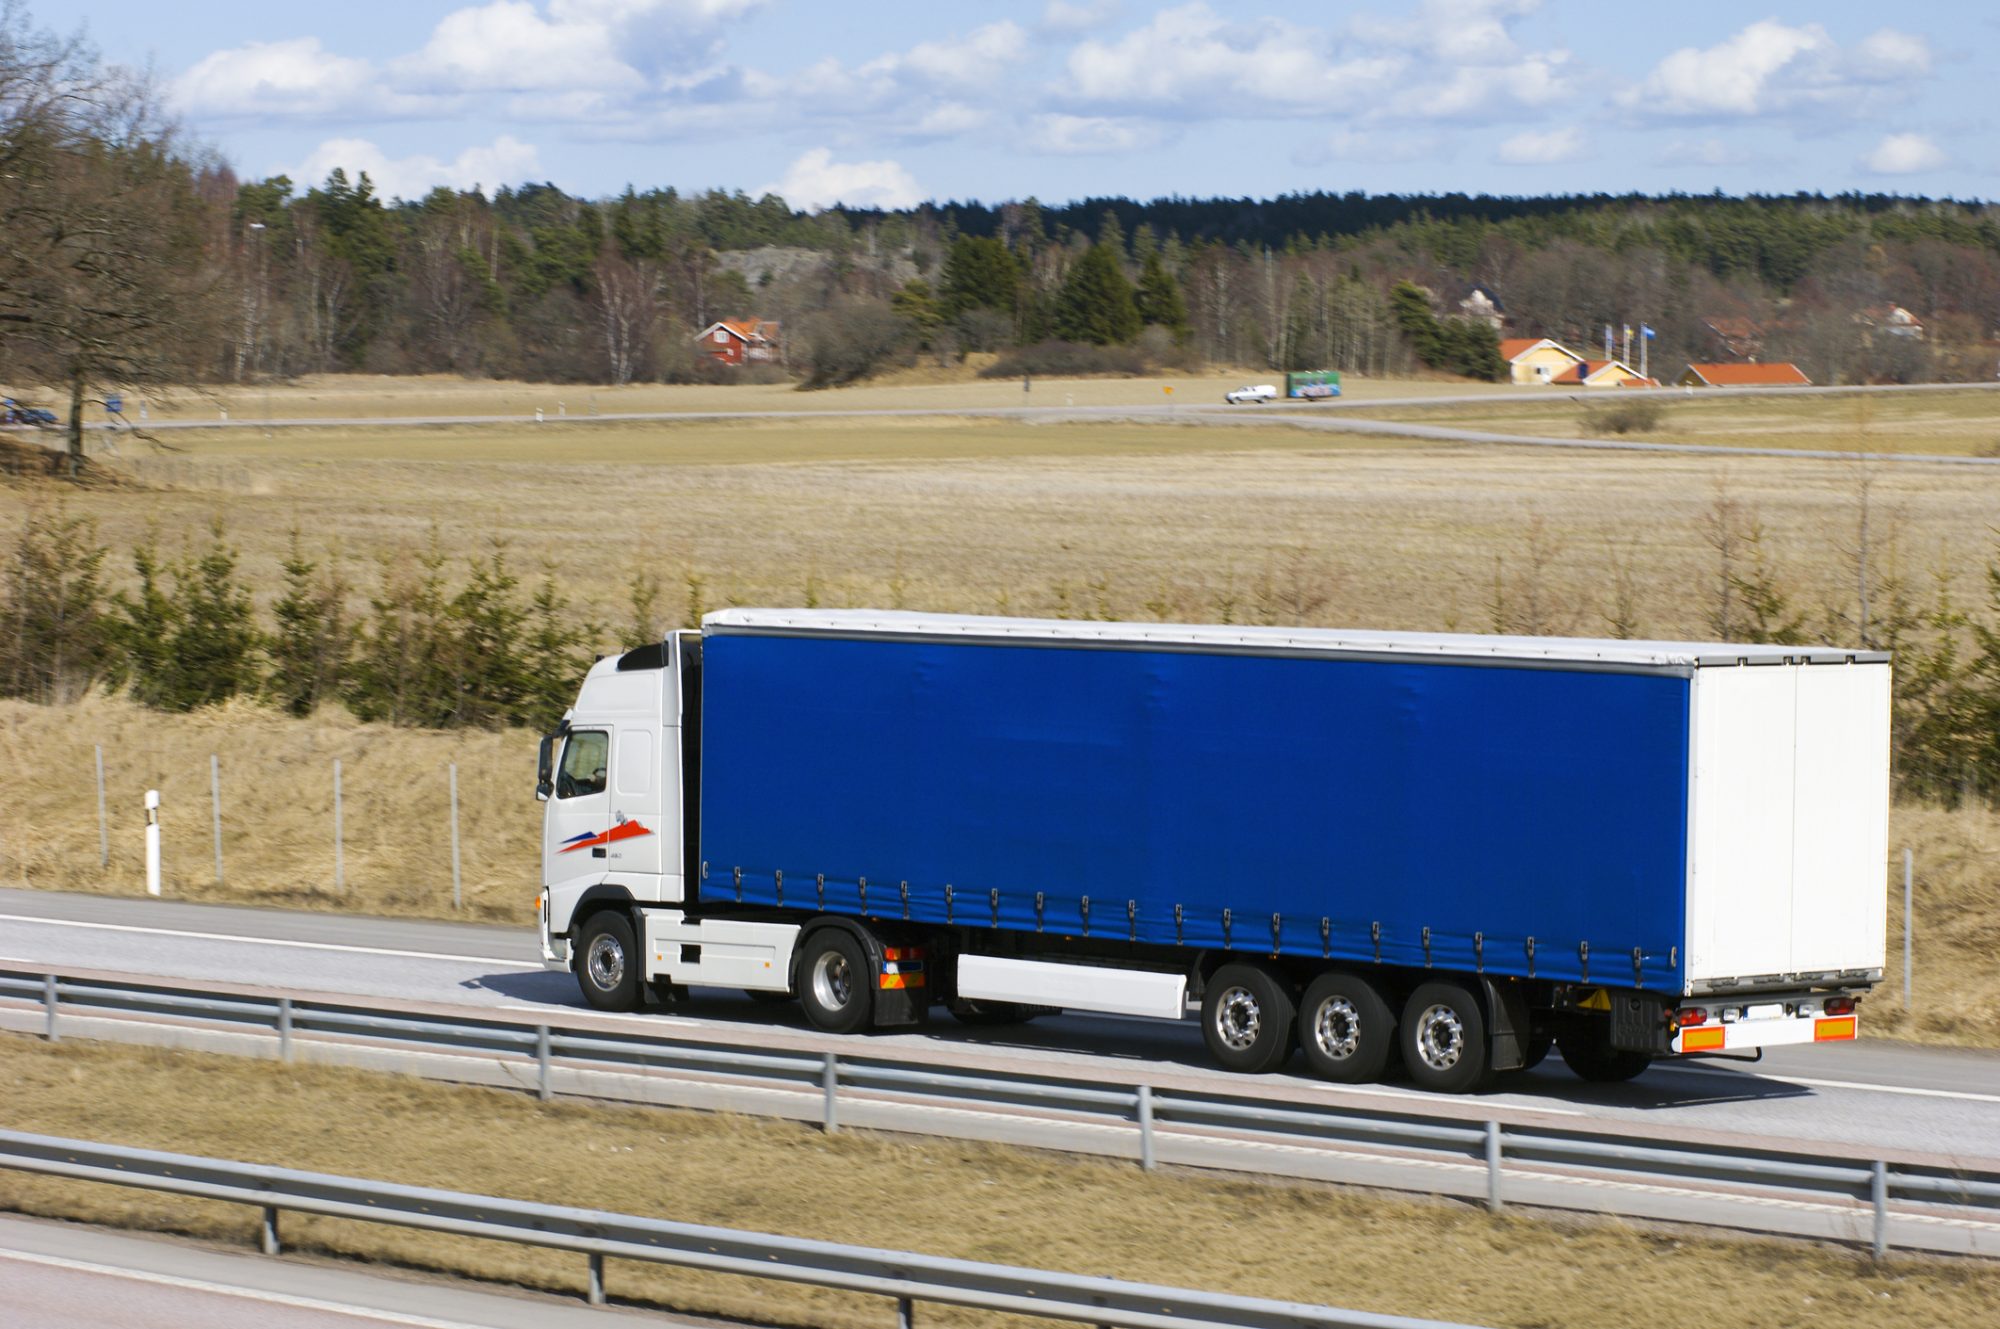 uk-government-to-create-temporary-visas-for-hgv-drivers